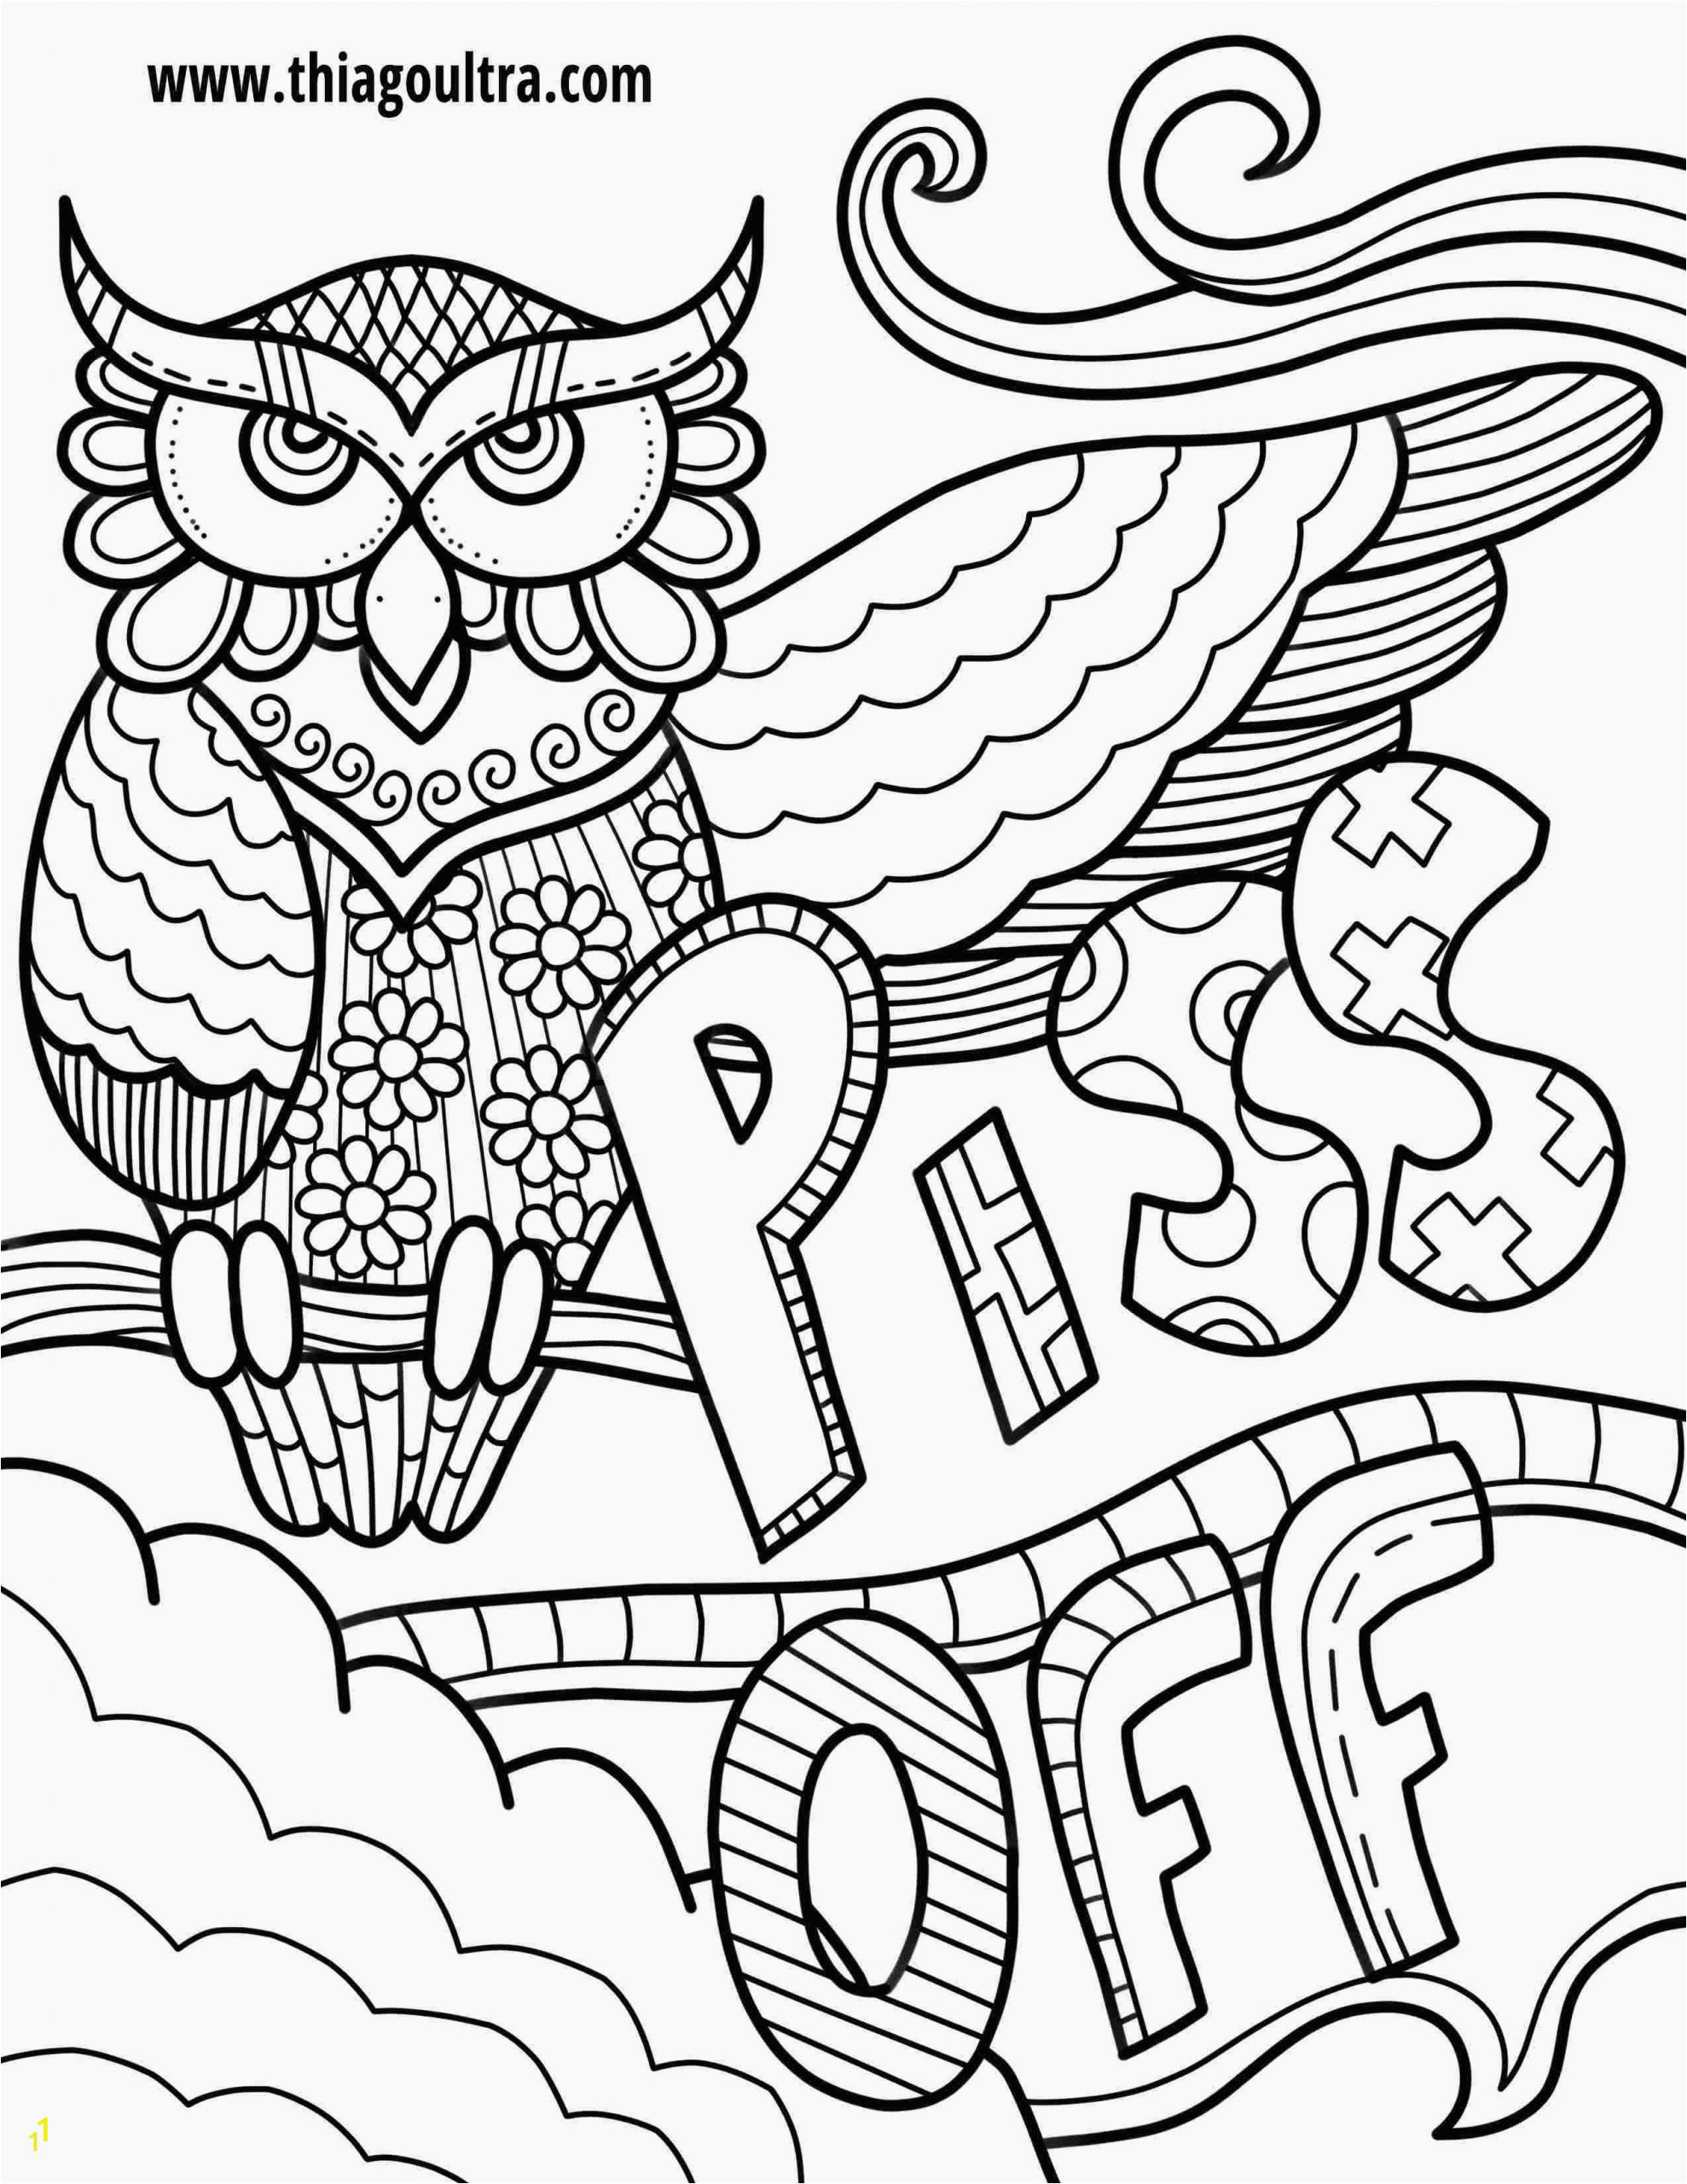 Free Printable Adult Swear Word Coloring Pages Free Printable Coloring Pages for Adults Ly Swear Words